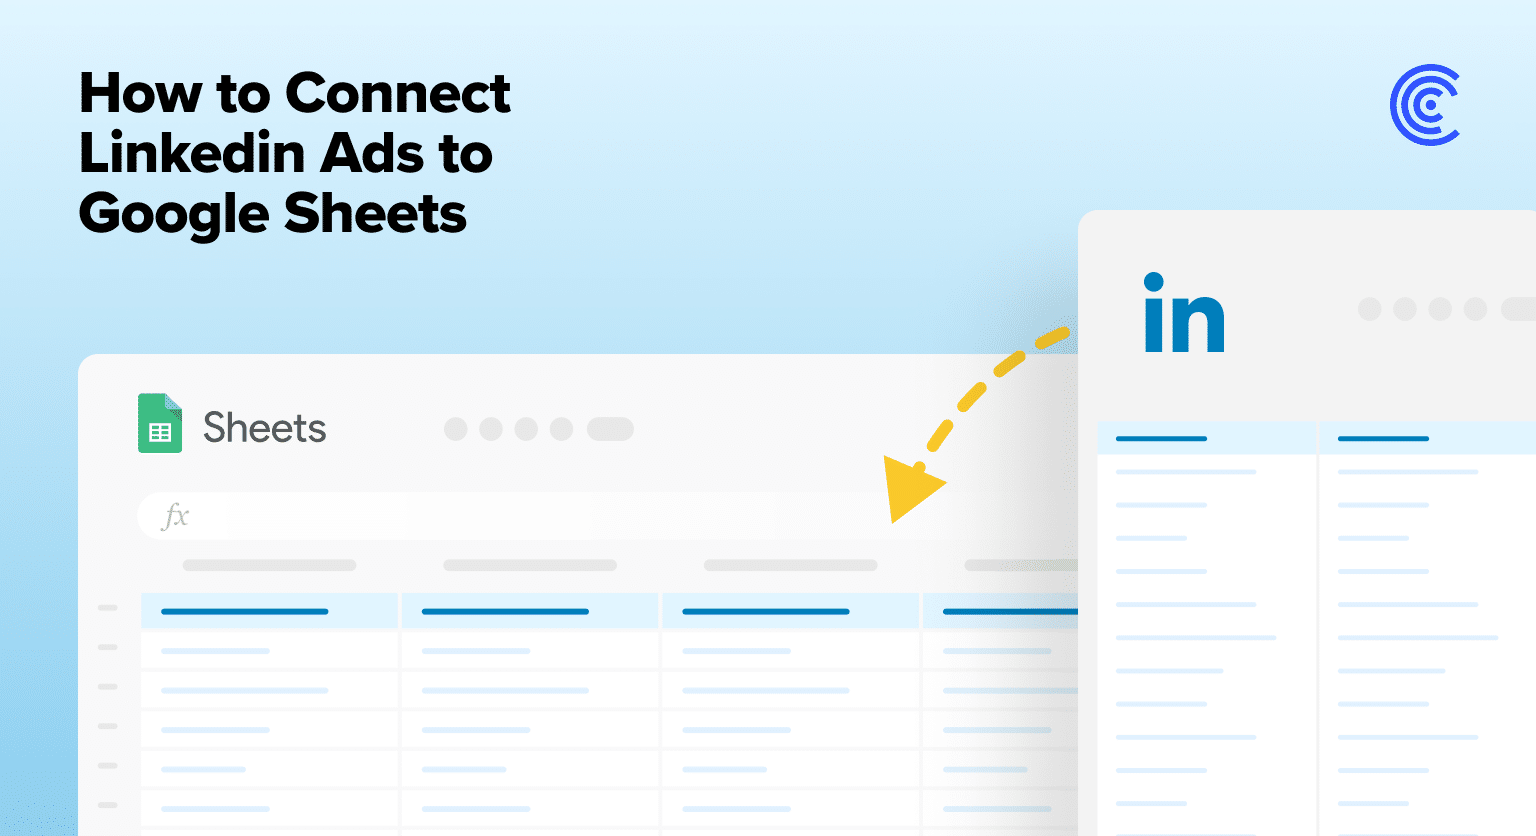 Learn how to connect LinkedIn Ads to Google Sheets for easier B2B marketing analytics. Explore methods like Coefficient, Zapier, and App Scripts.